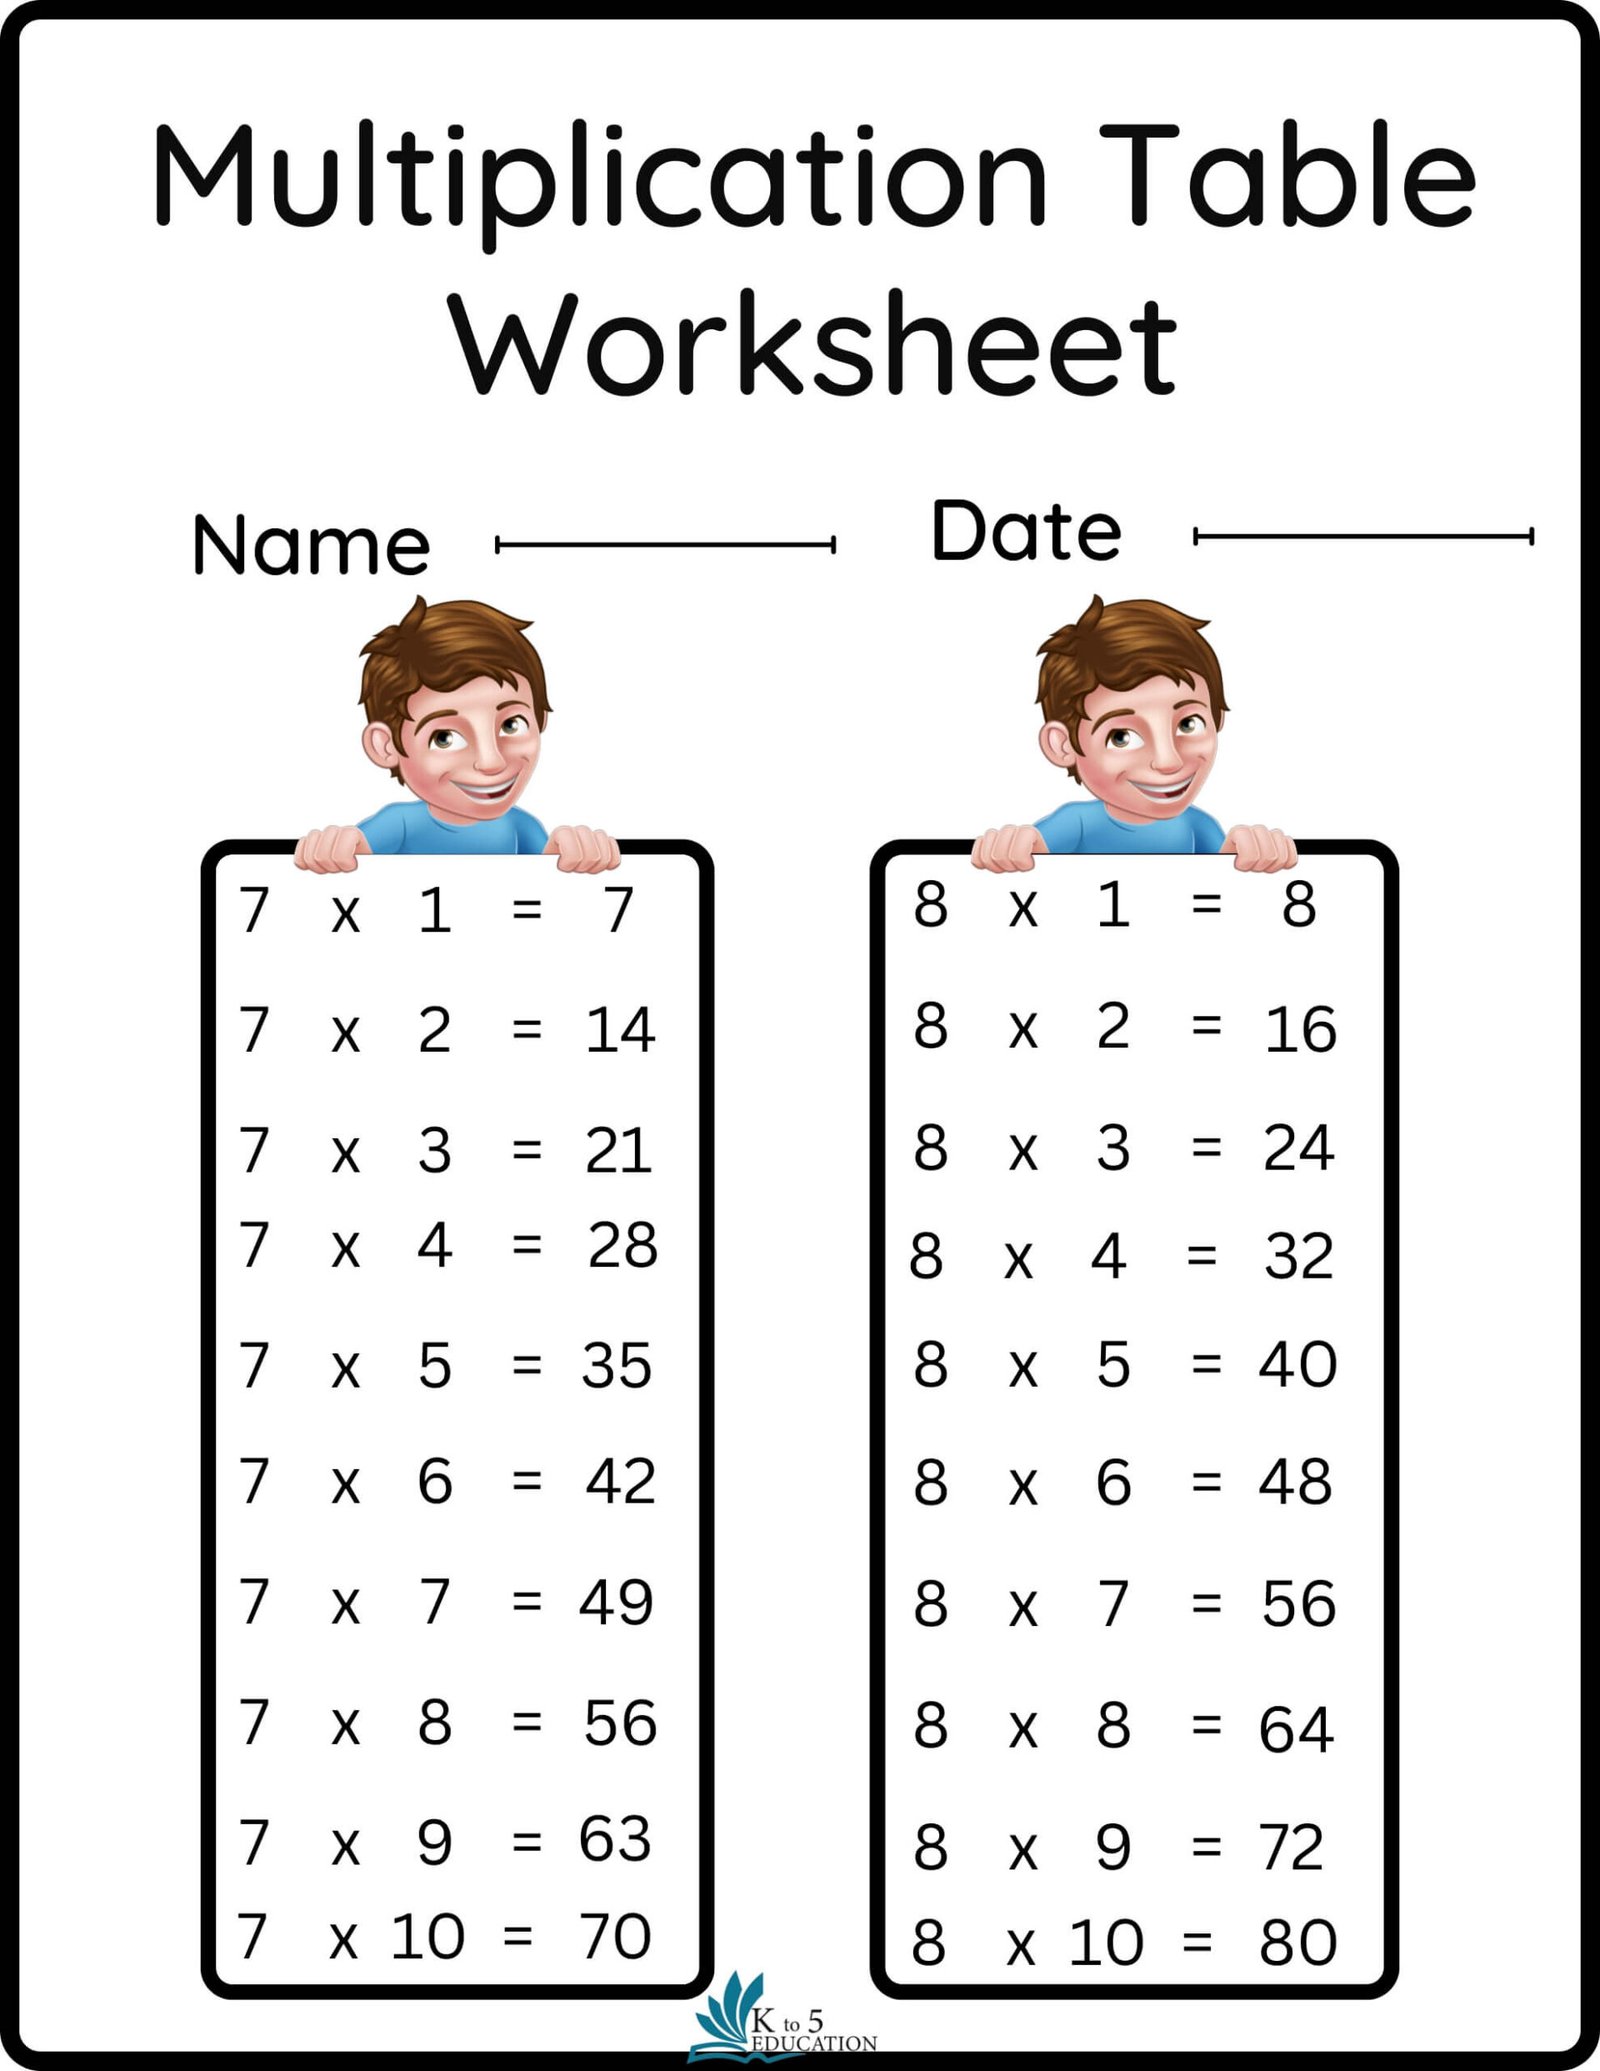 multiplication-time-table-worksheets-free-download